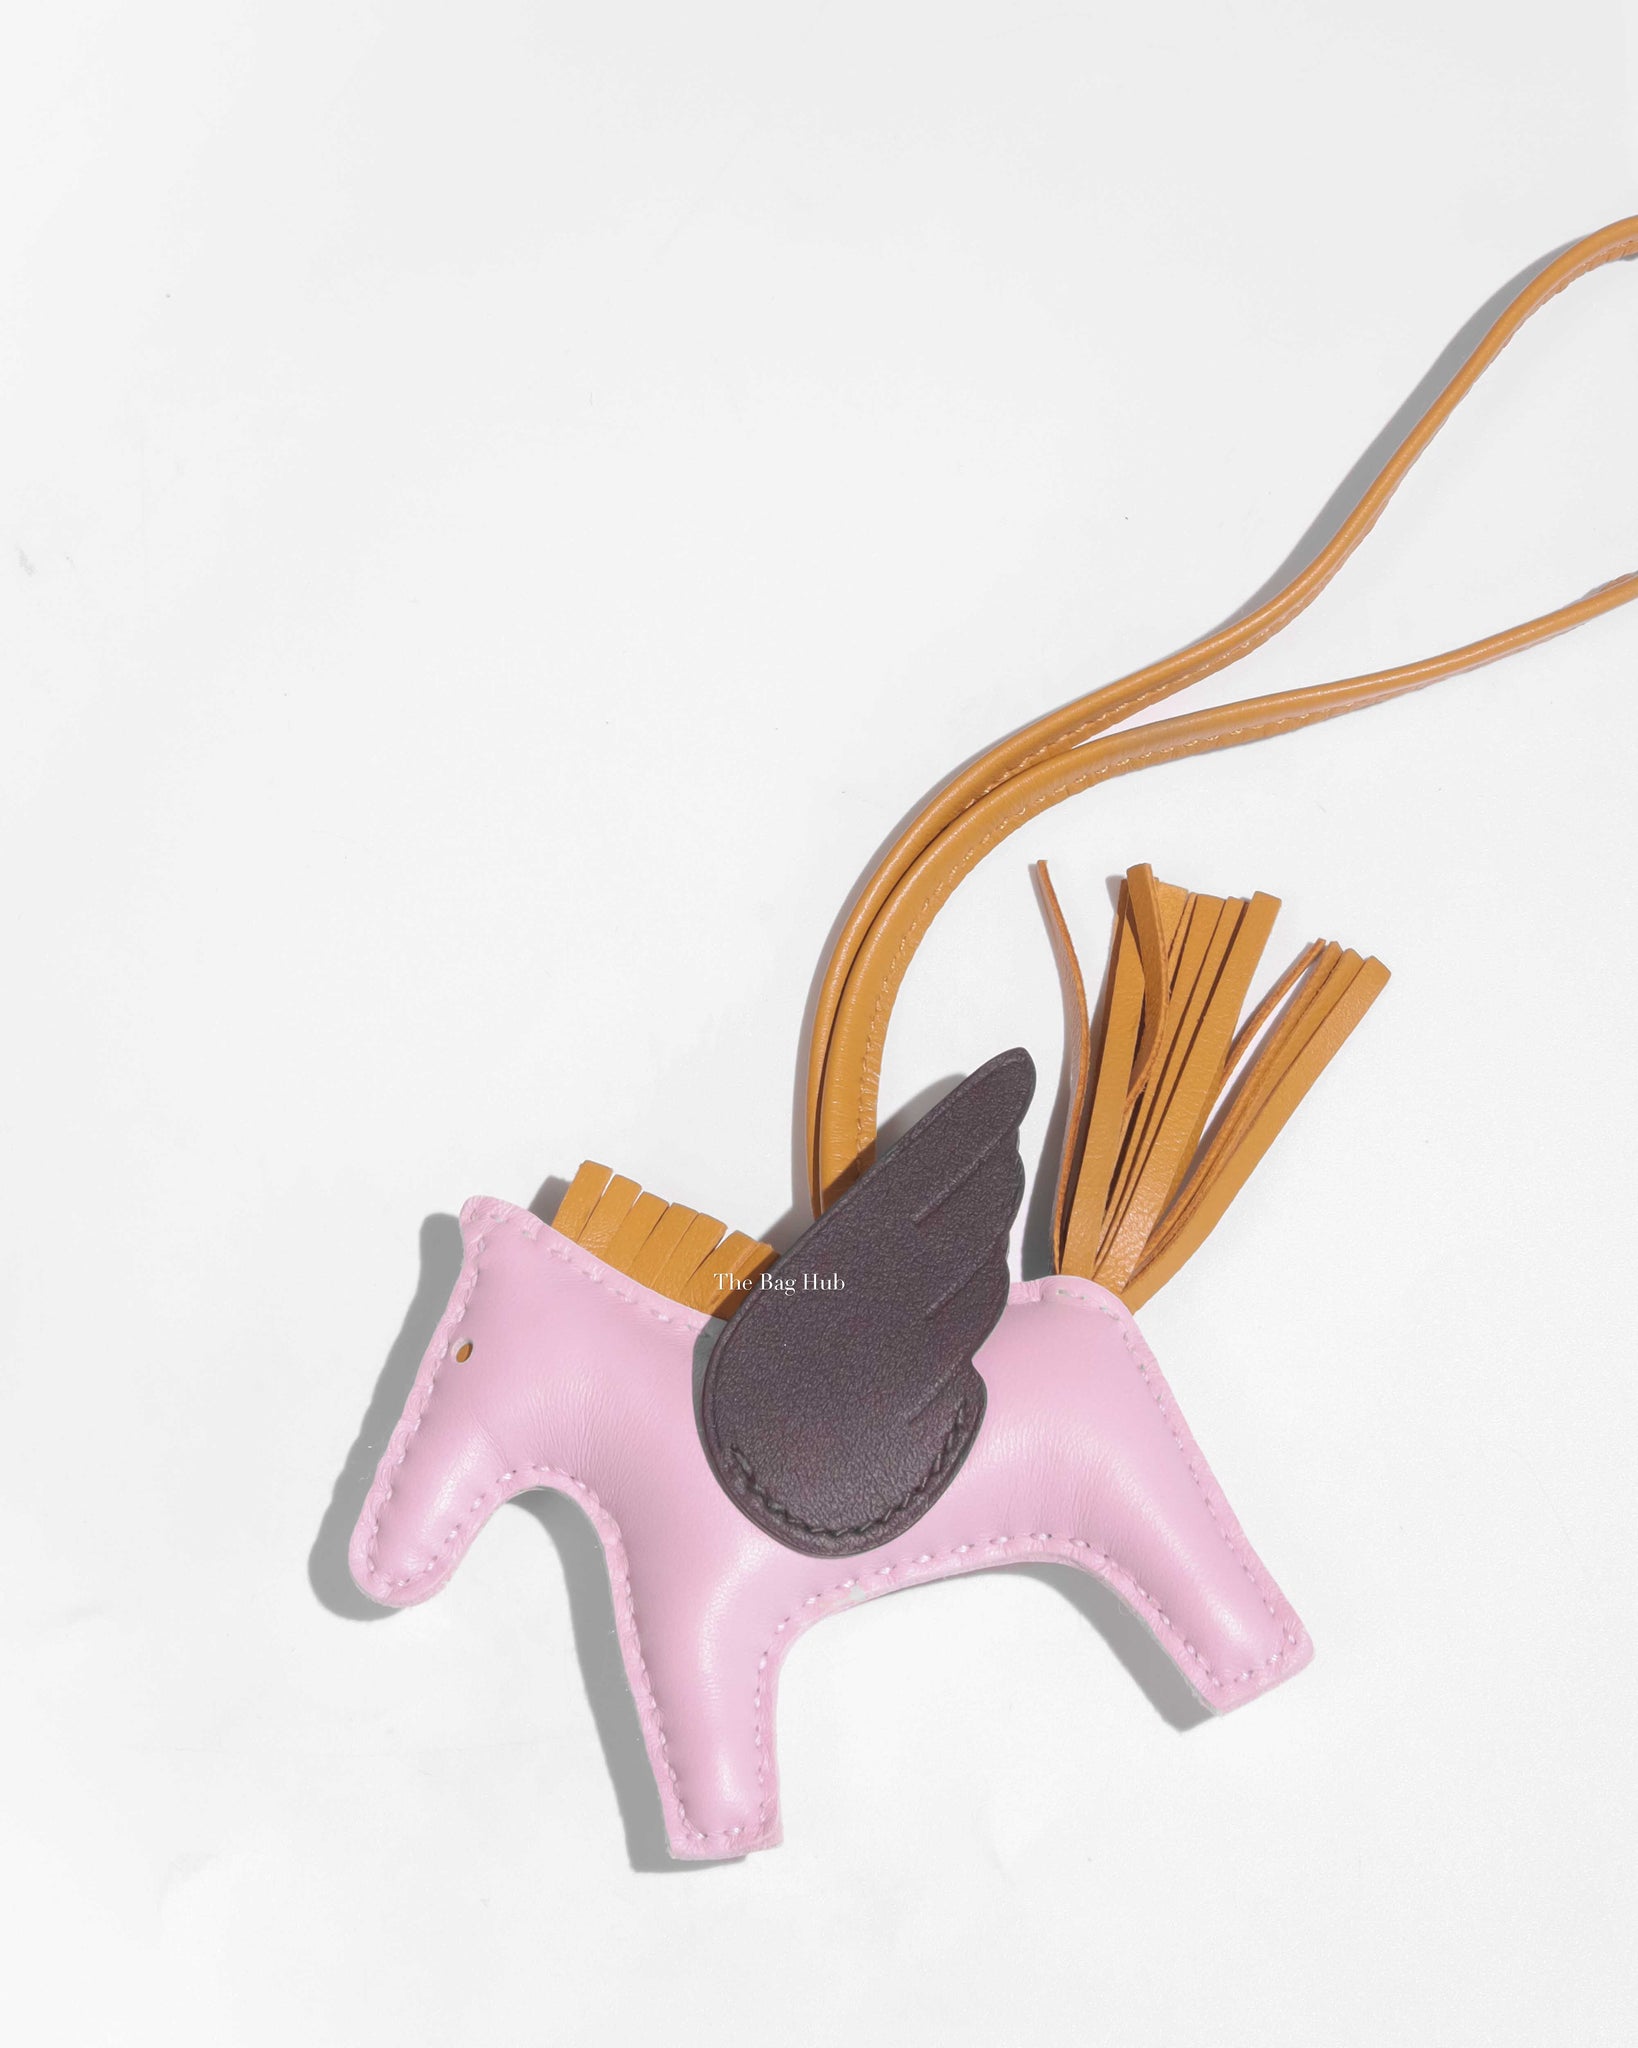 Sold at Auction: Hermès: a Mauve Pale, Sesame and Ebene Rodeo